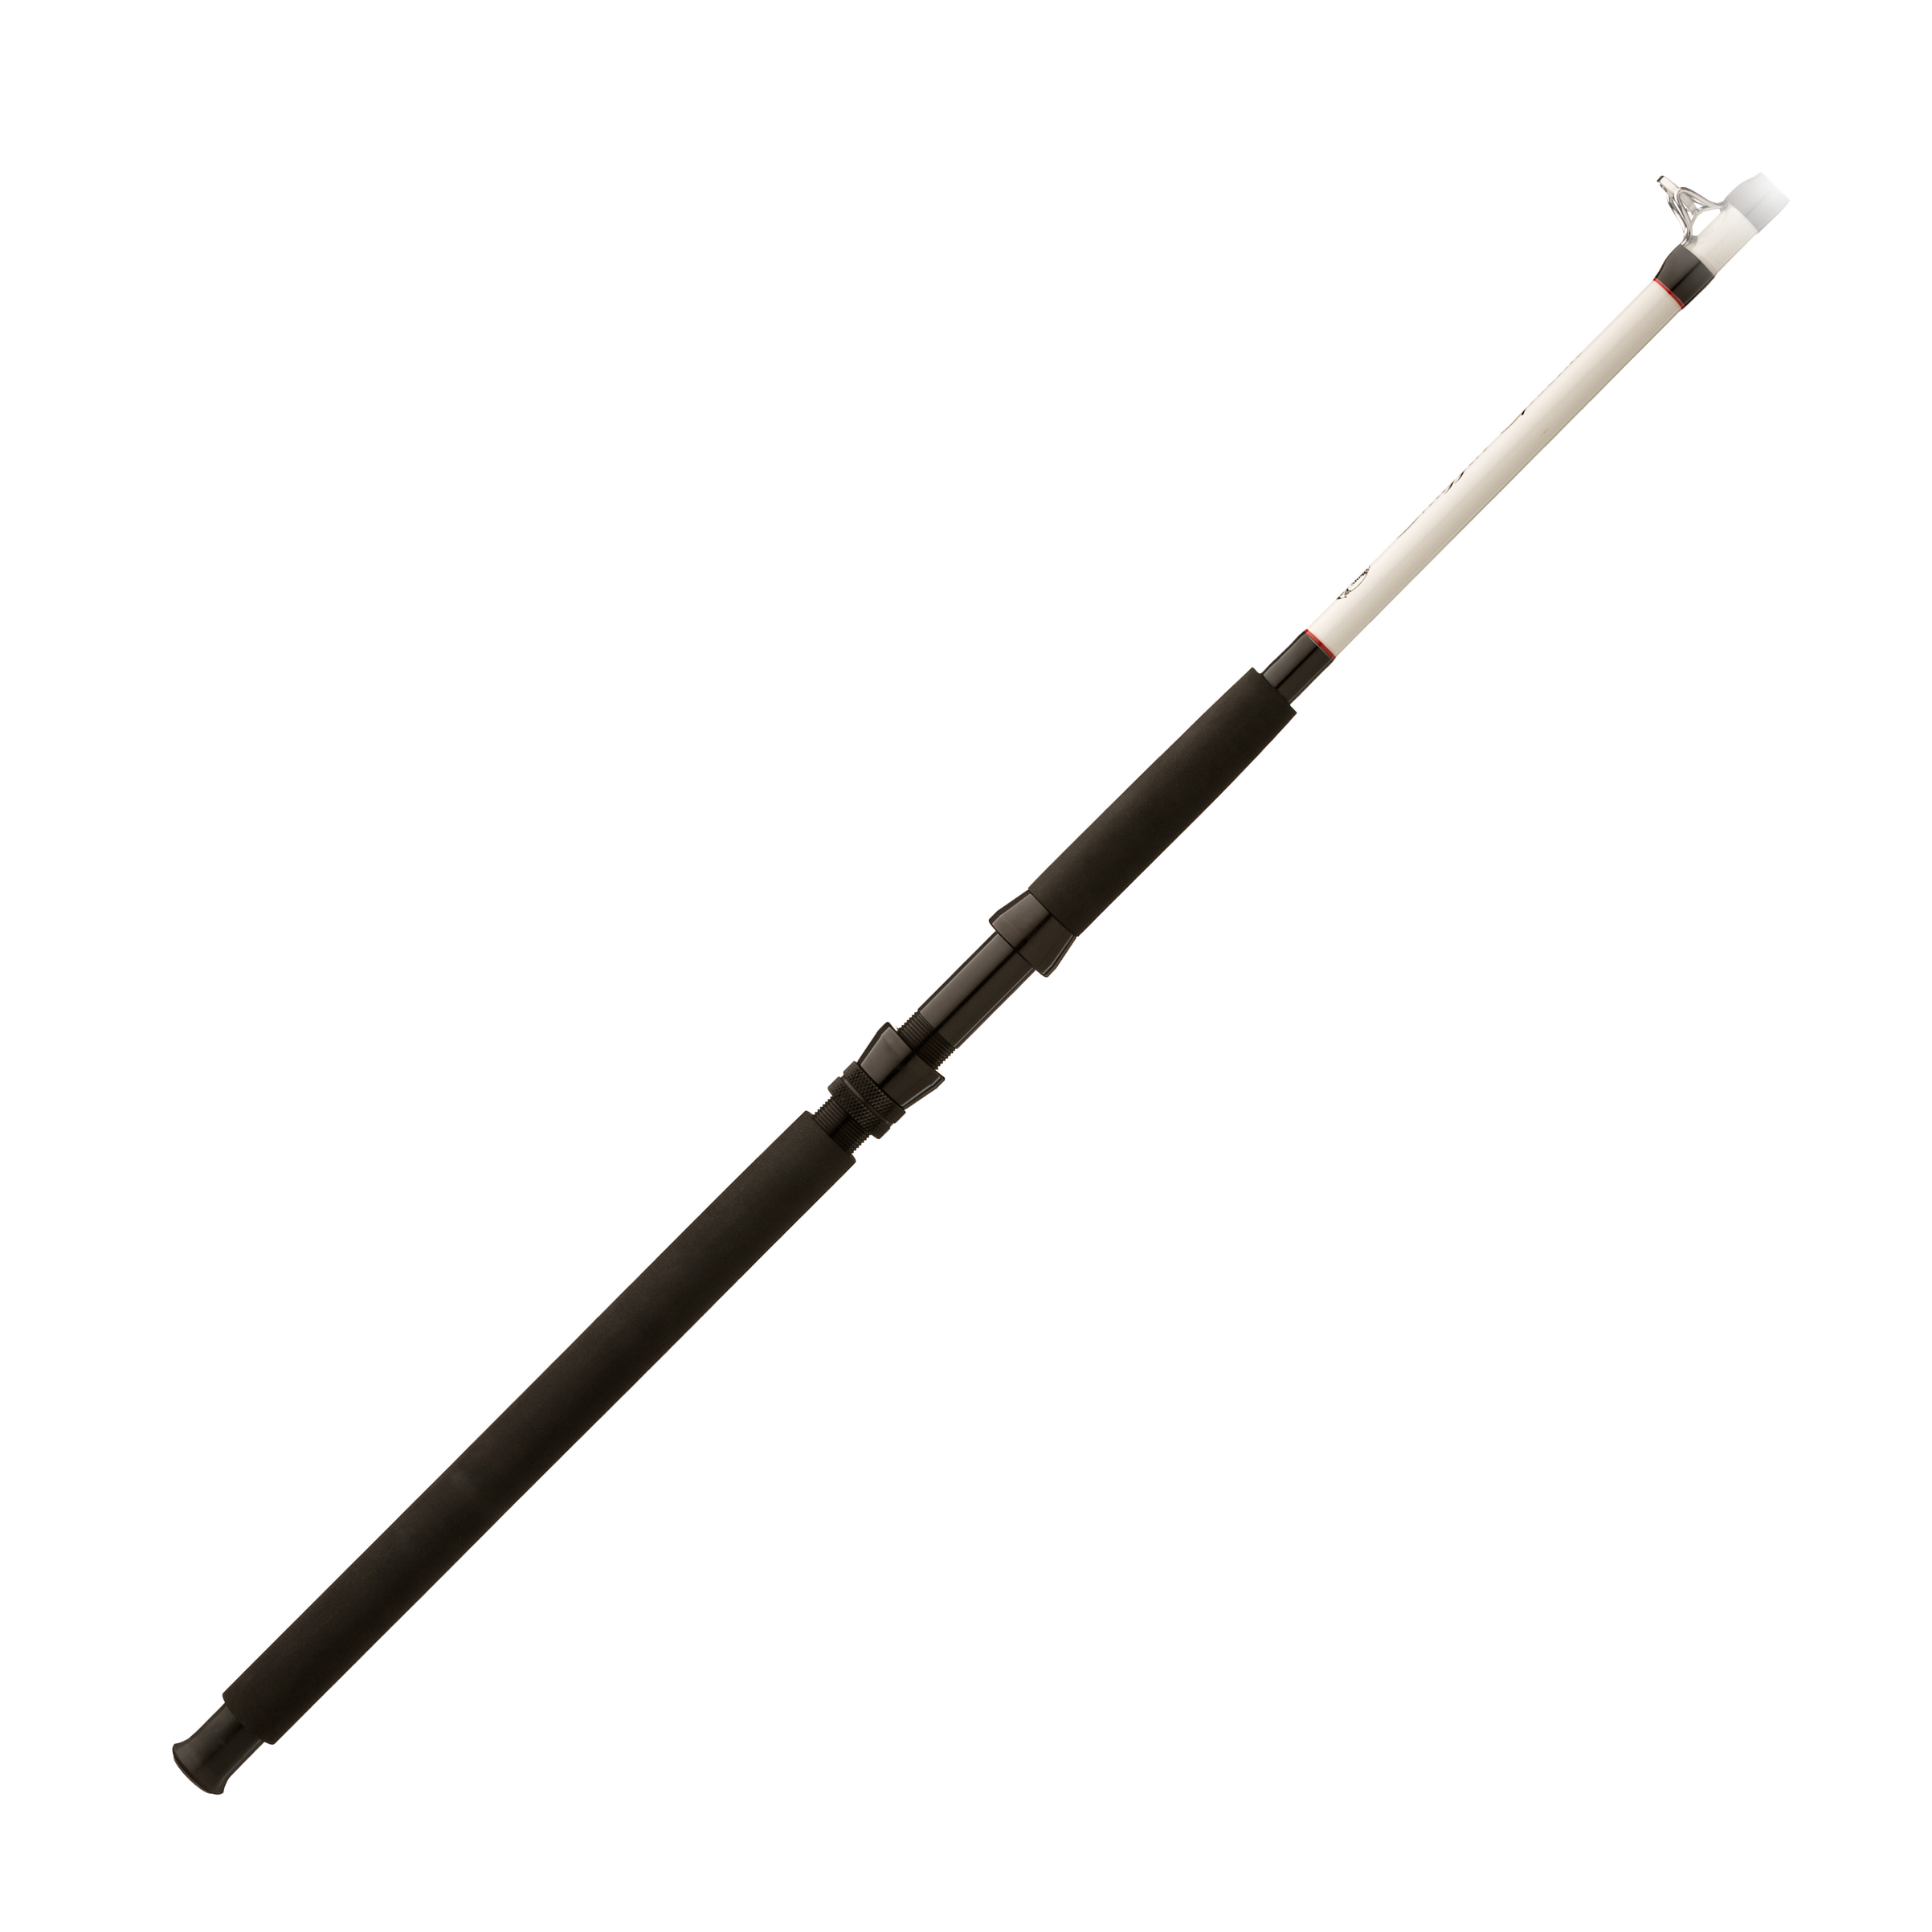 Bass Pro Shops Snaggin' Special Snagging Rod - 7' Heavy